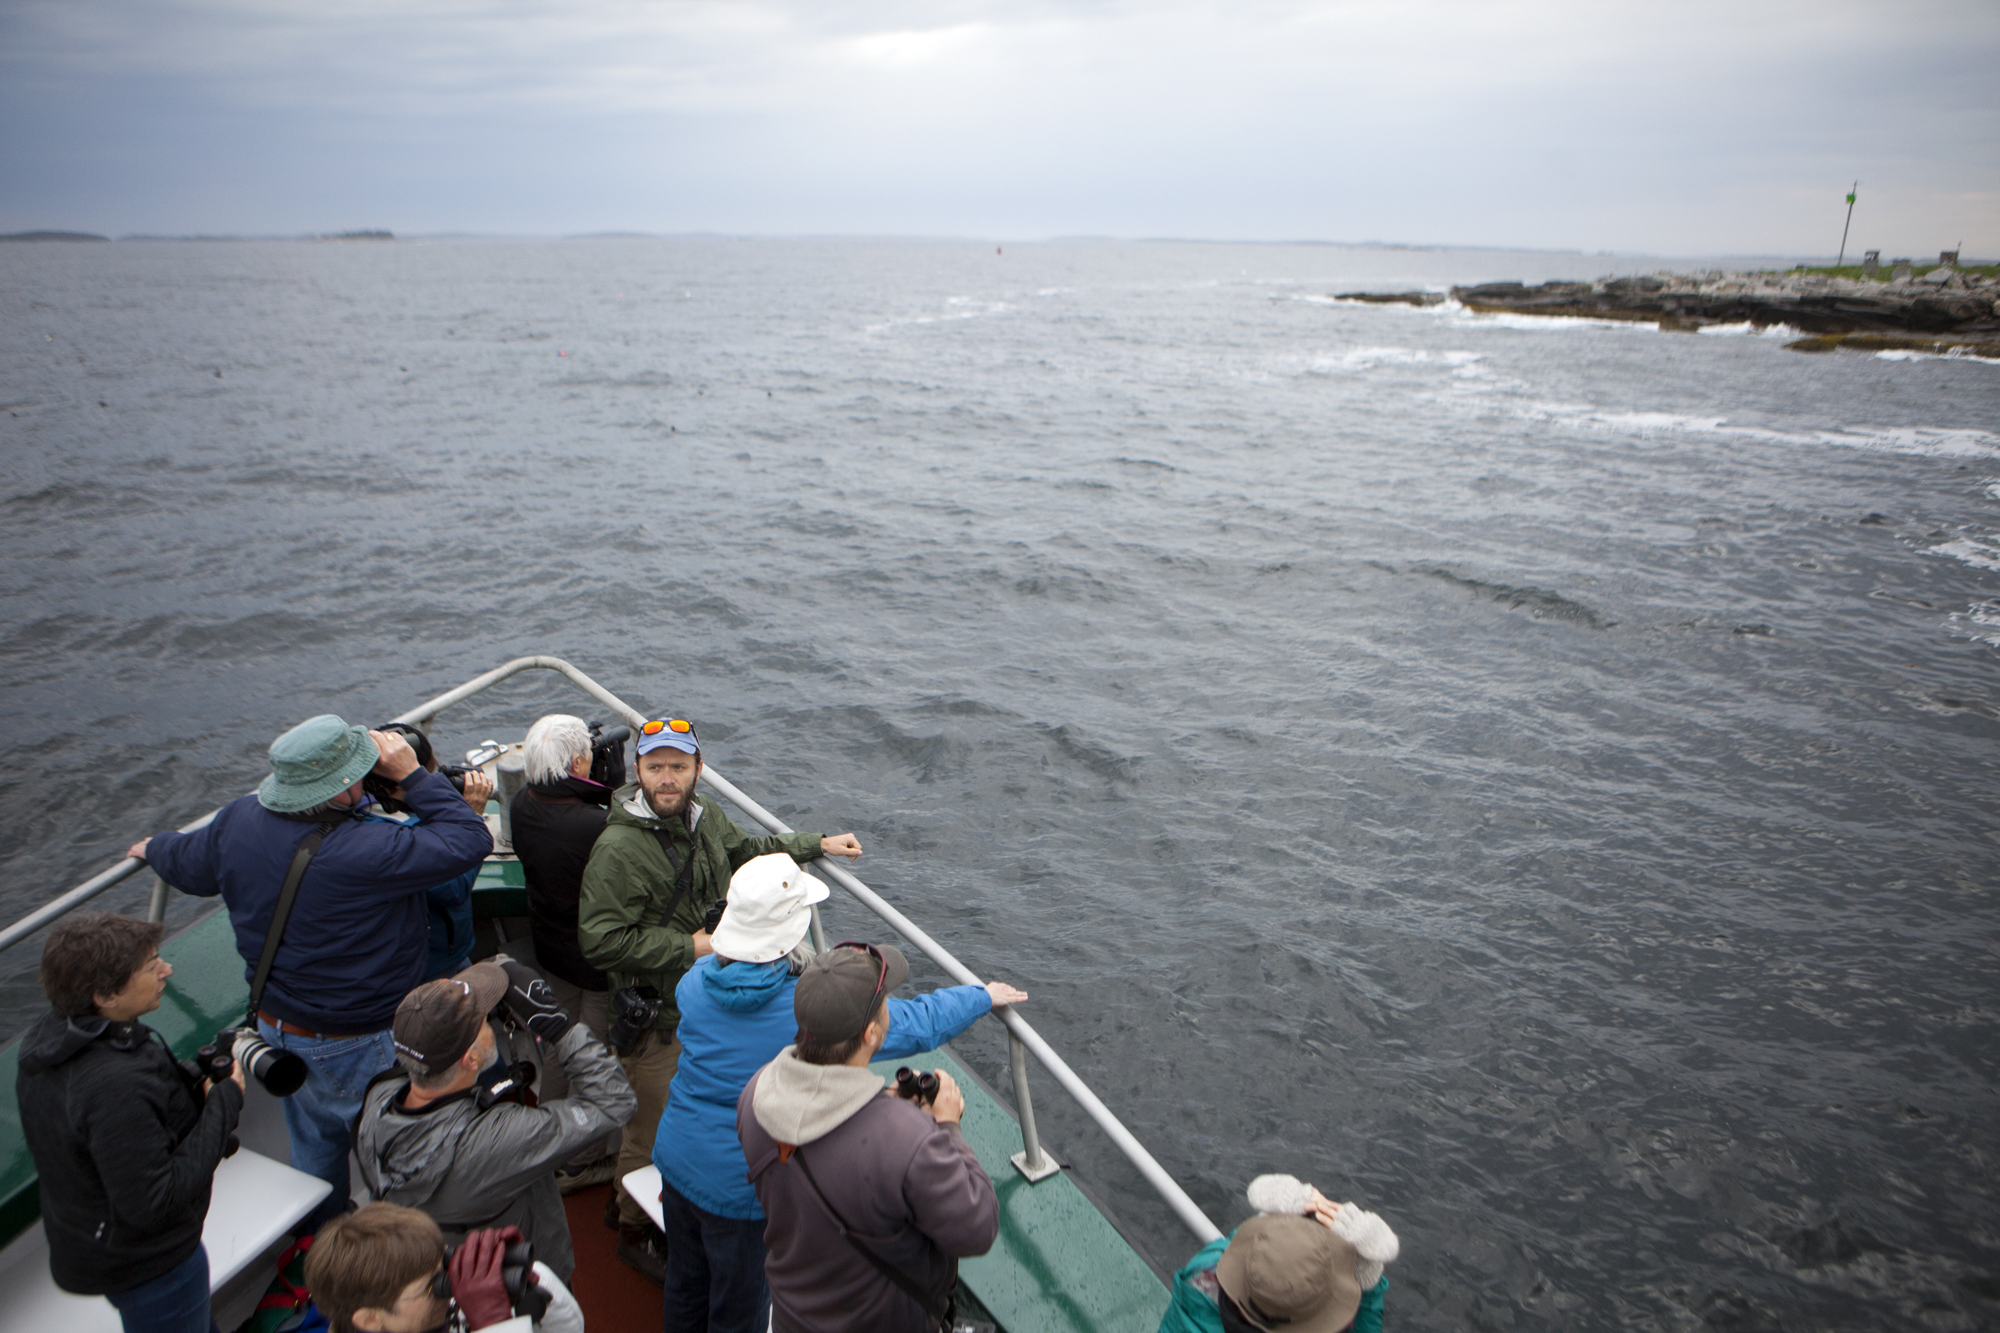  Birders look for Atlantic Puffins, Black Guillemots, and terns near Eastern Egg Rock on the way to Matinicus Rock off the coast of Maine on June 8. 